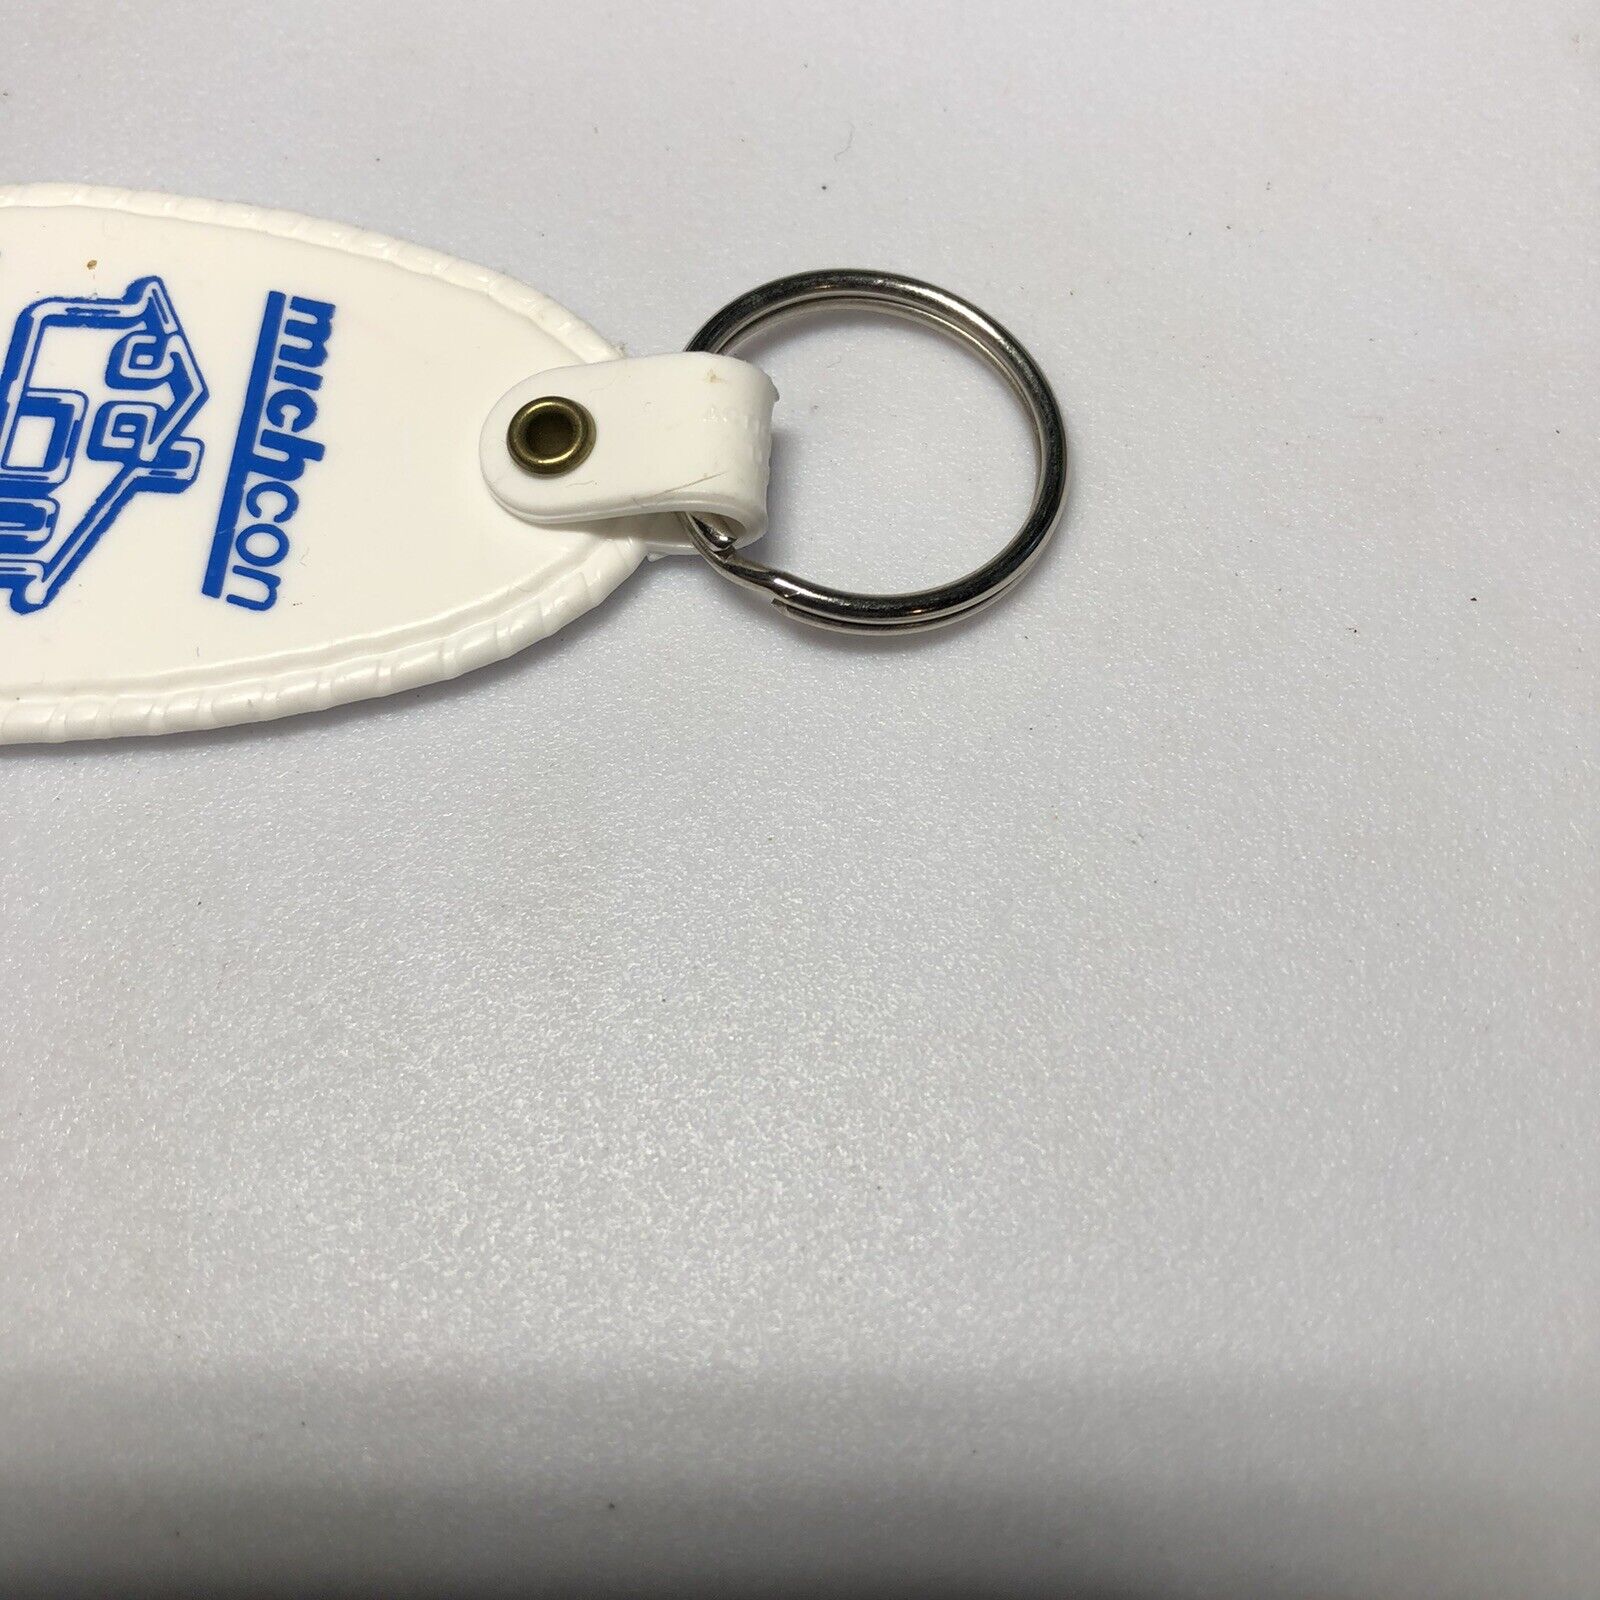 michcon-michigan-consolidated-gas-company-power-utility-energy-keychain